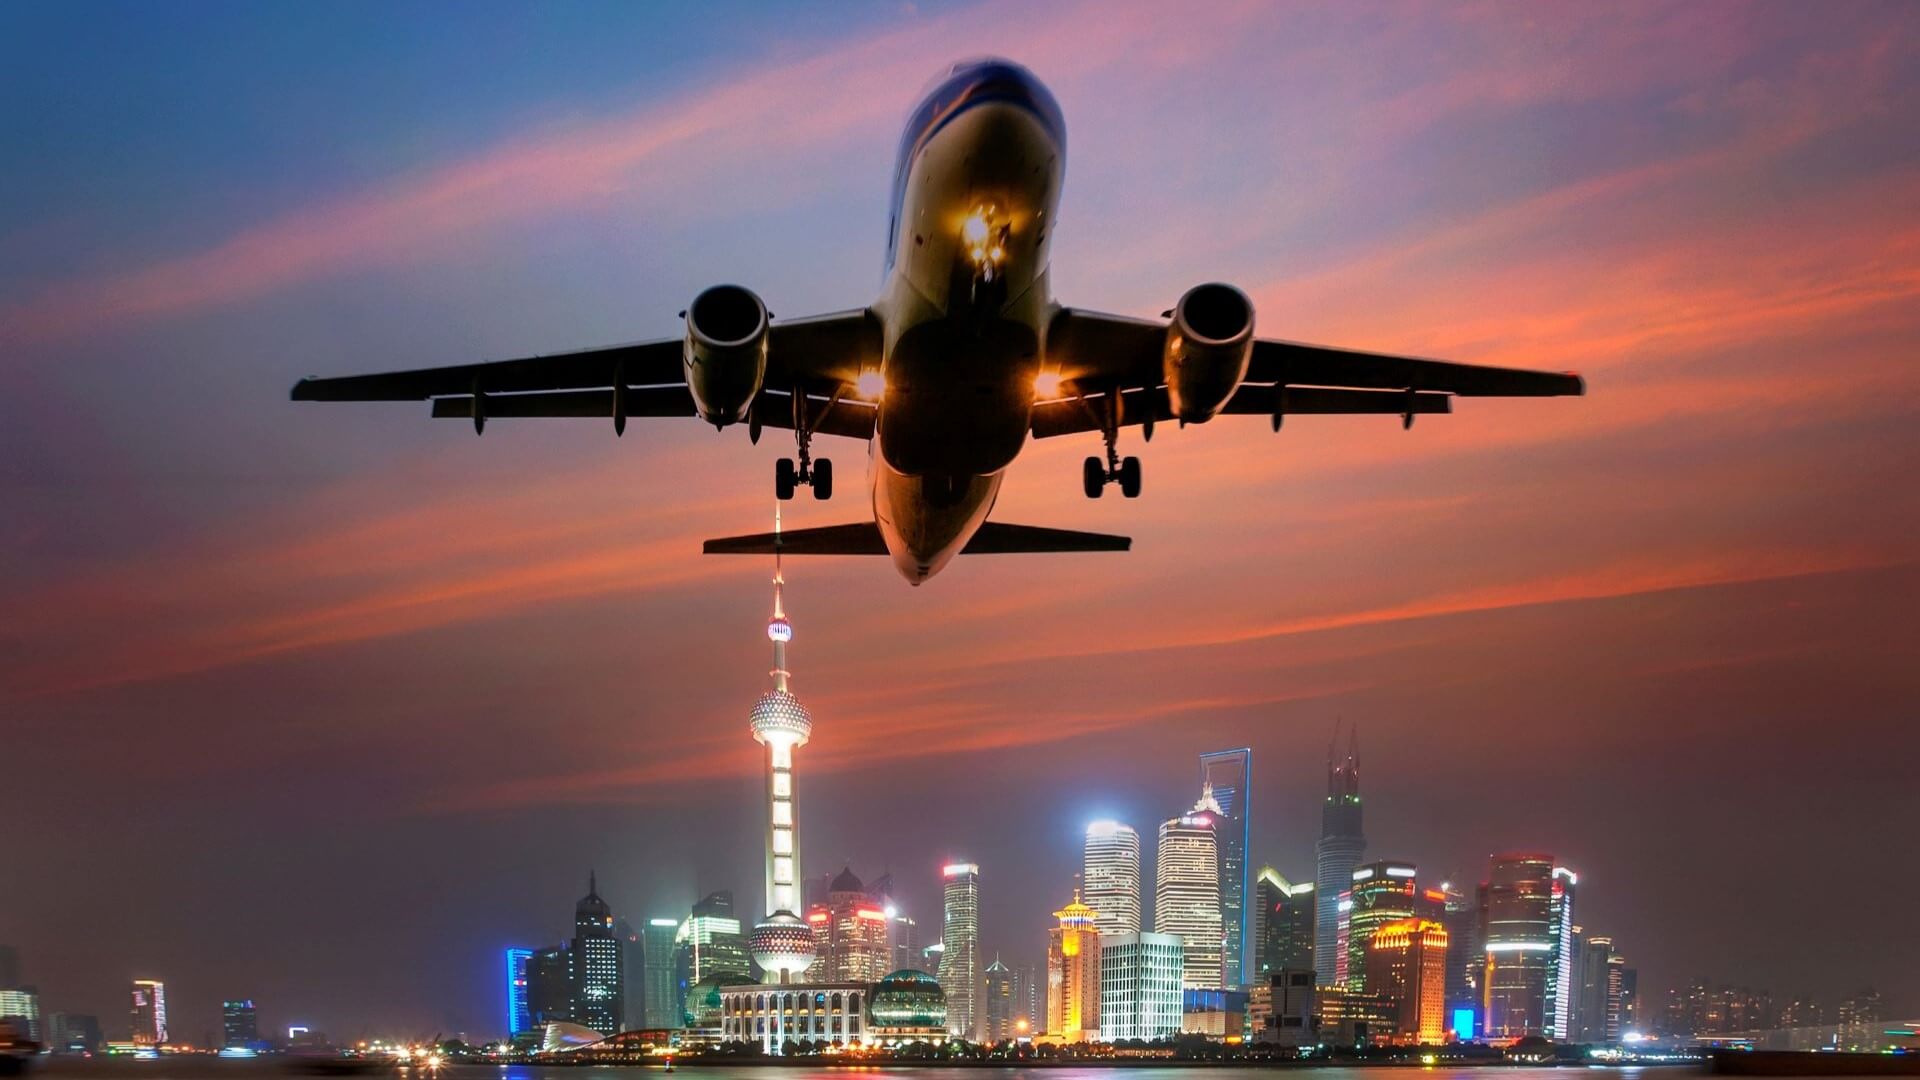 Aircraft taking off over Shanghai skyline at night